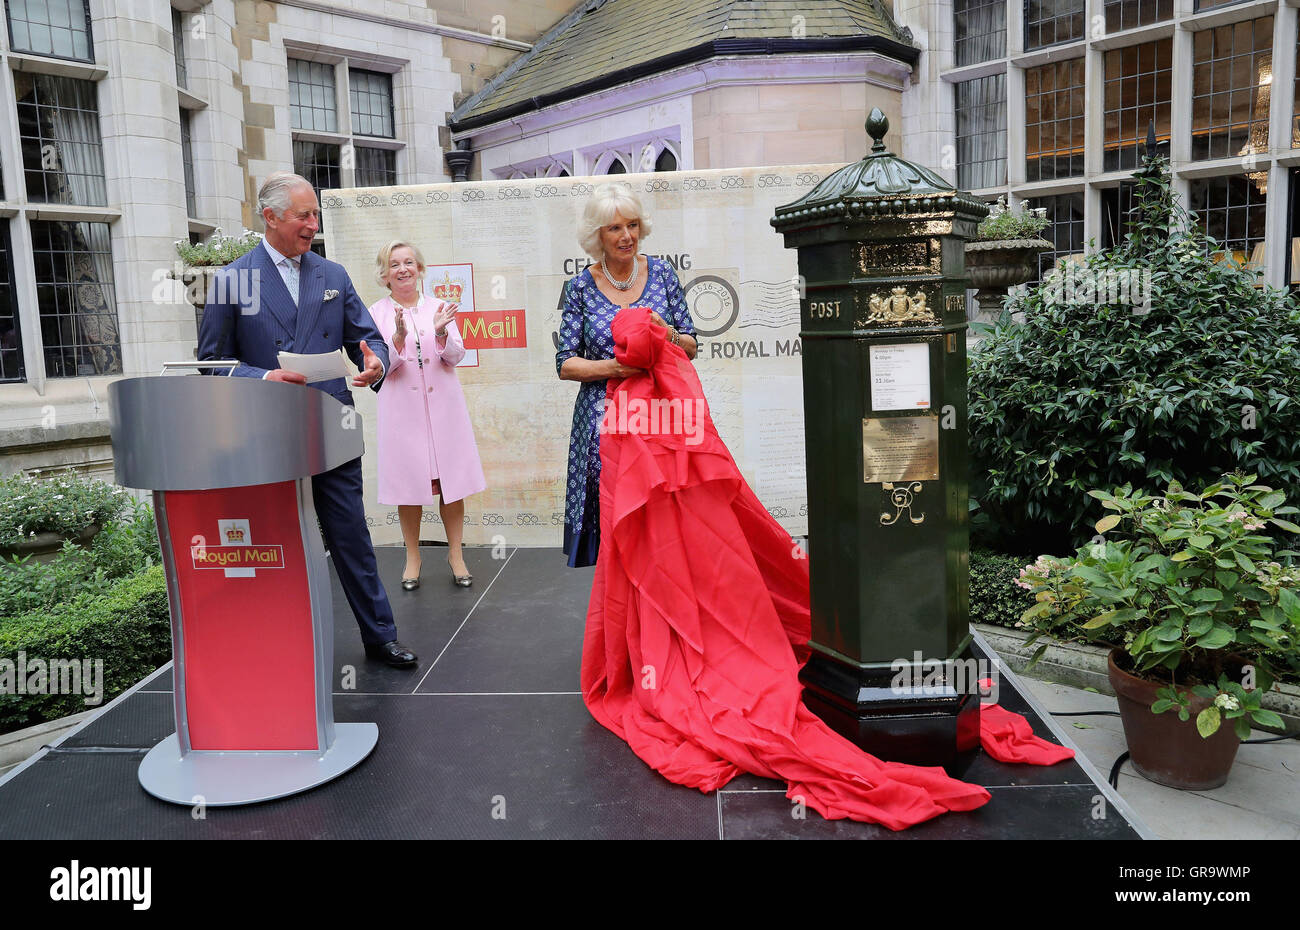 The Prince of Wales and the Duchess of Cornwall unveil a penfold postbox as they attend a reception to mark the 500th Anniversary of the Royal Mail at Merchant Taylor's Hall in London. Stock Photo